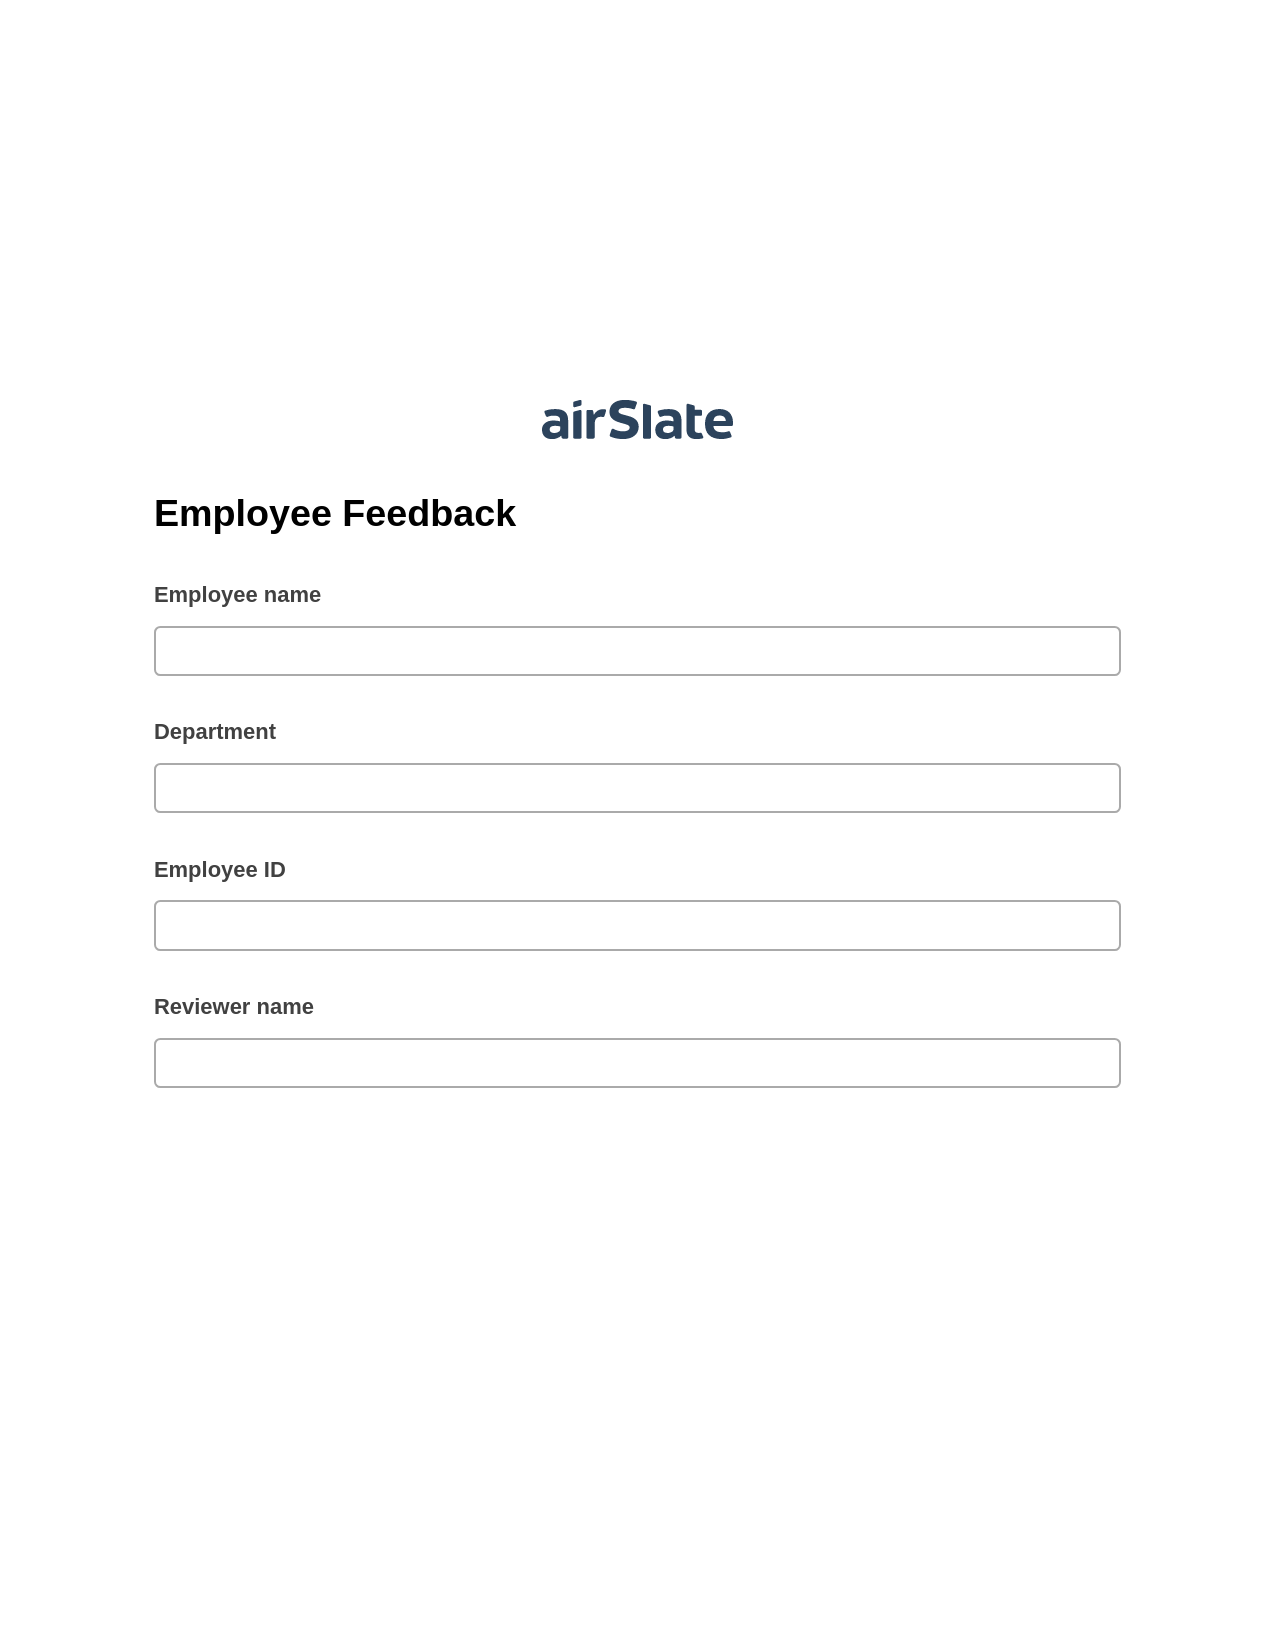 Employee Feedback Pre-fill from Salesforce Record Bot, Unassign Role Bot, Export to Google Sheet Bot